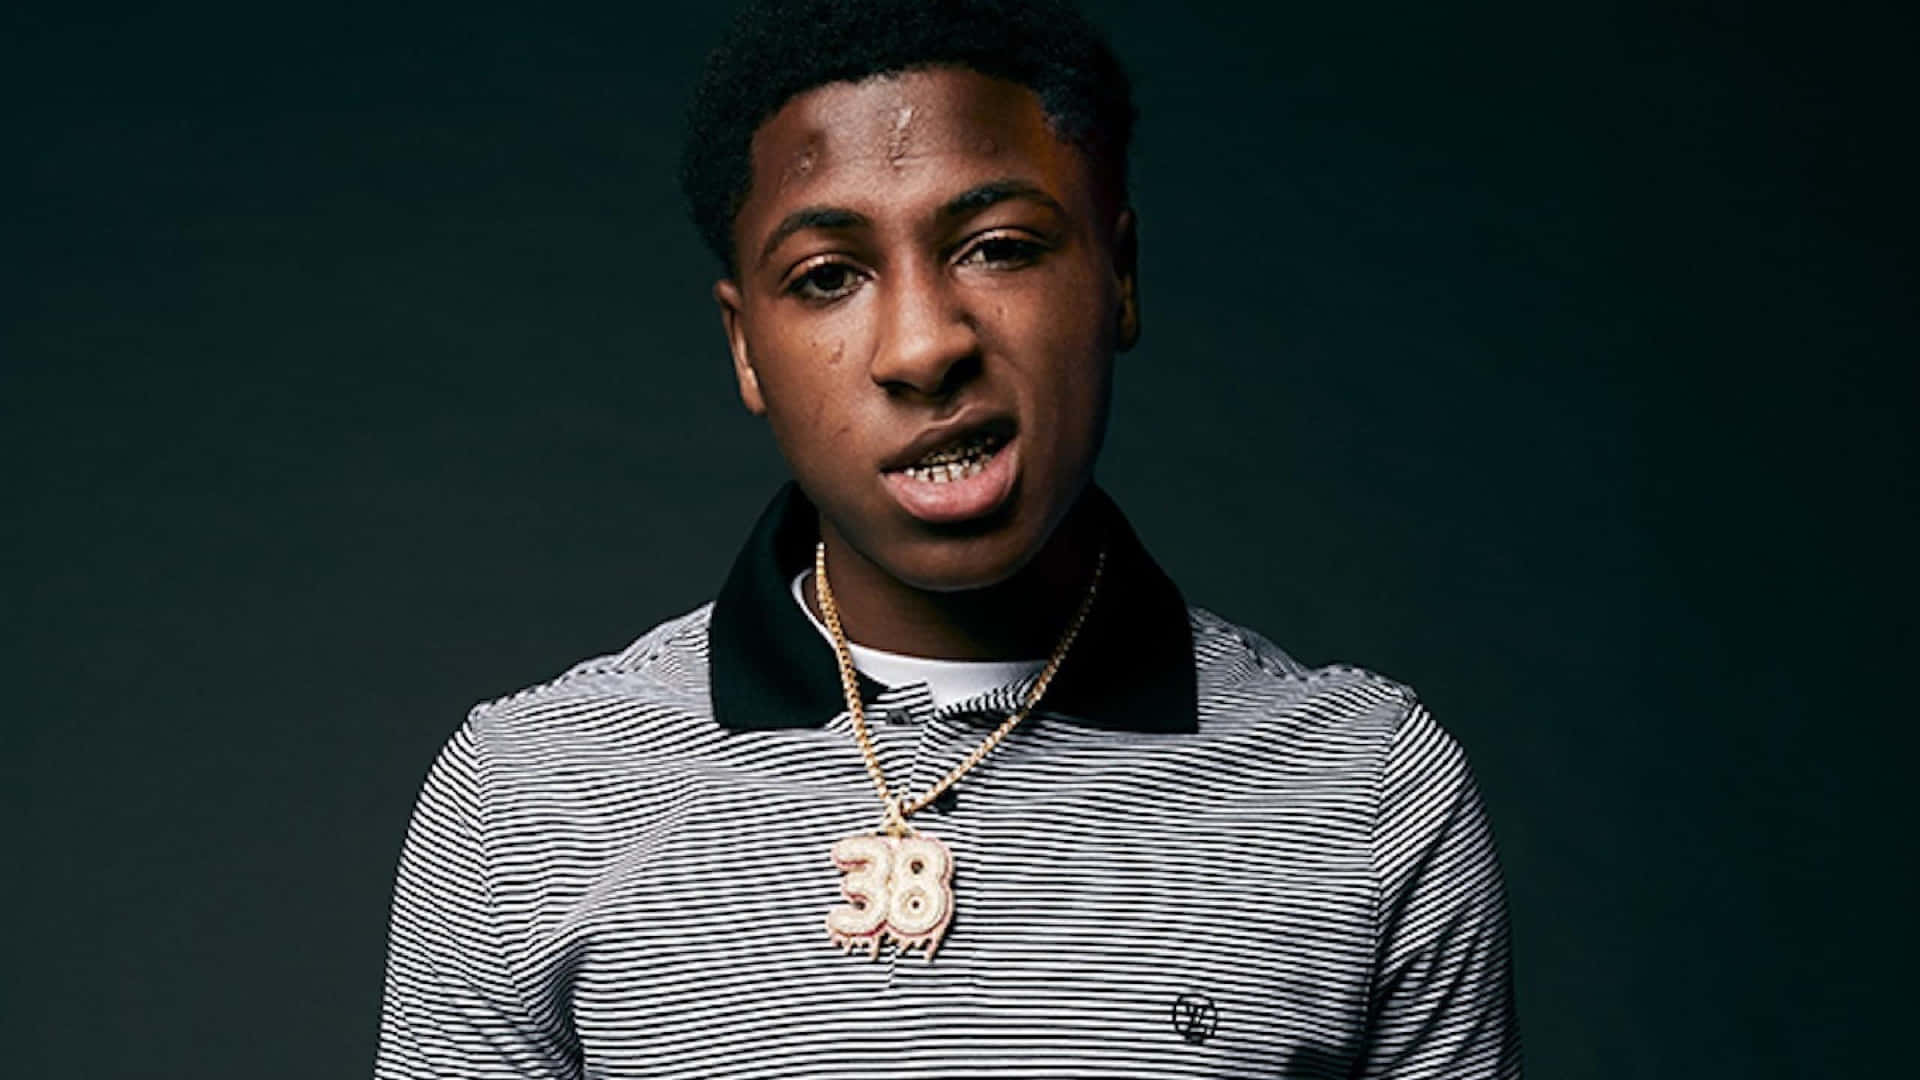 Nba Youngboy strides forward with a determined look